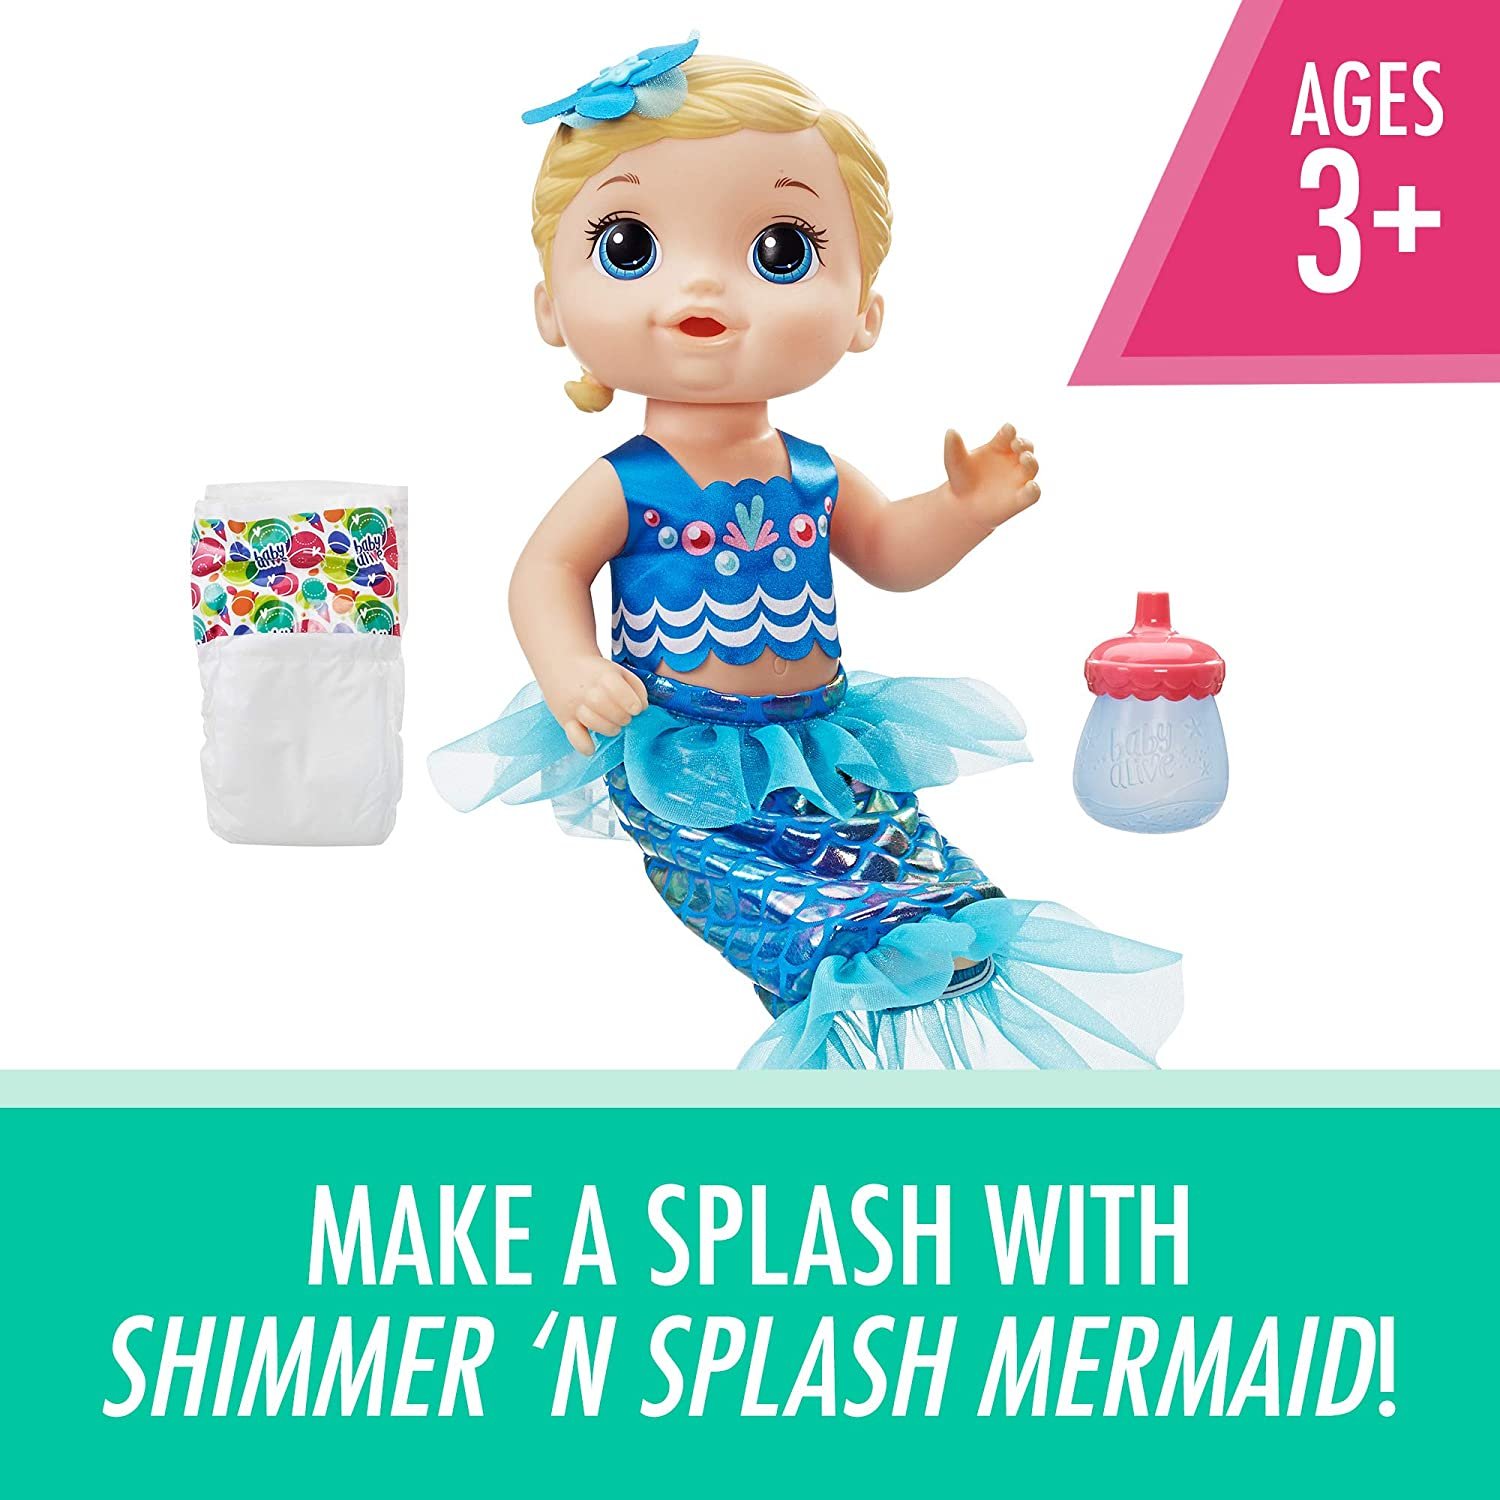 Baby Alive: Shimmer 'n Splash Mermaid 14-Inch Doll Brown Hair, Green Eyes Kids Toy for Boys and Girls - image 4 of 8